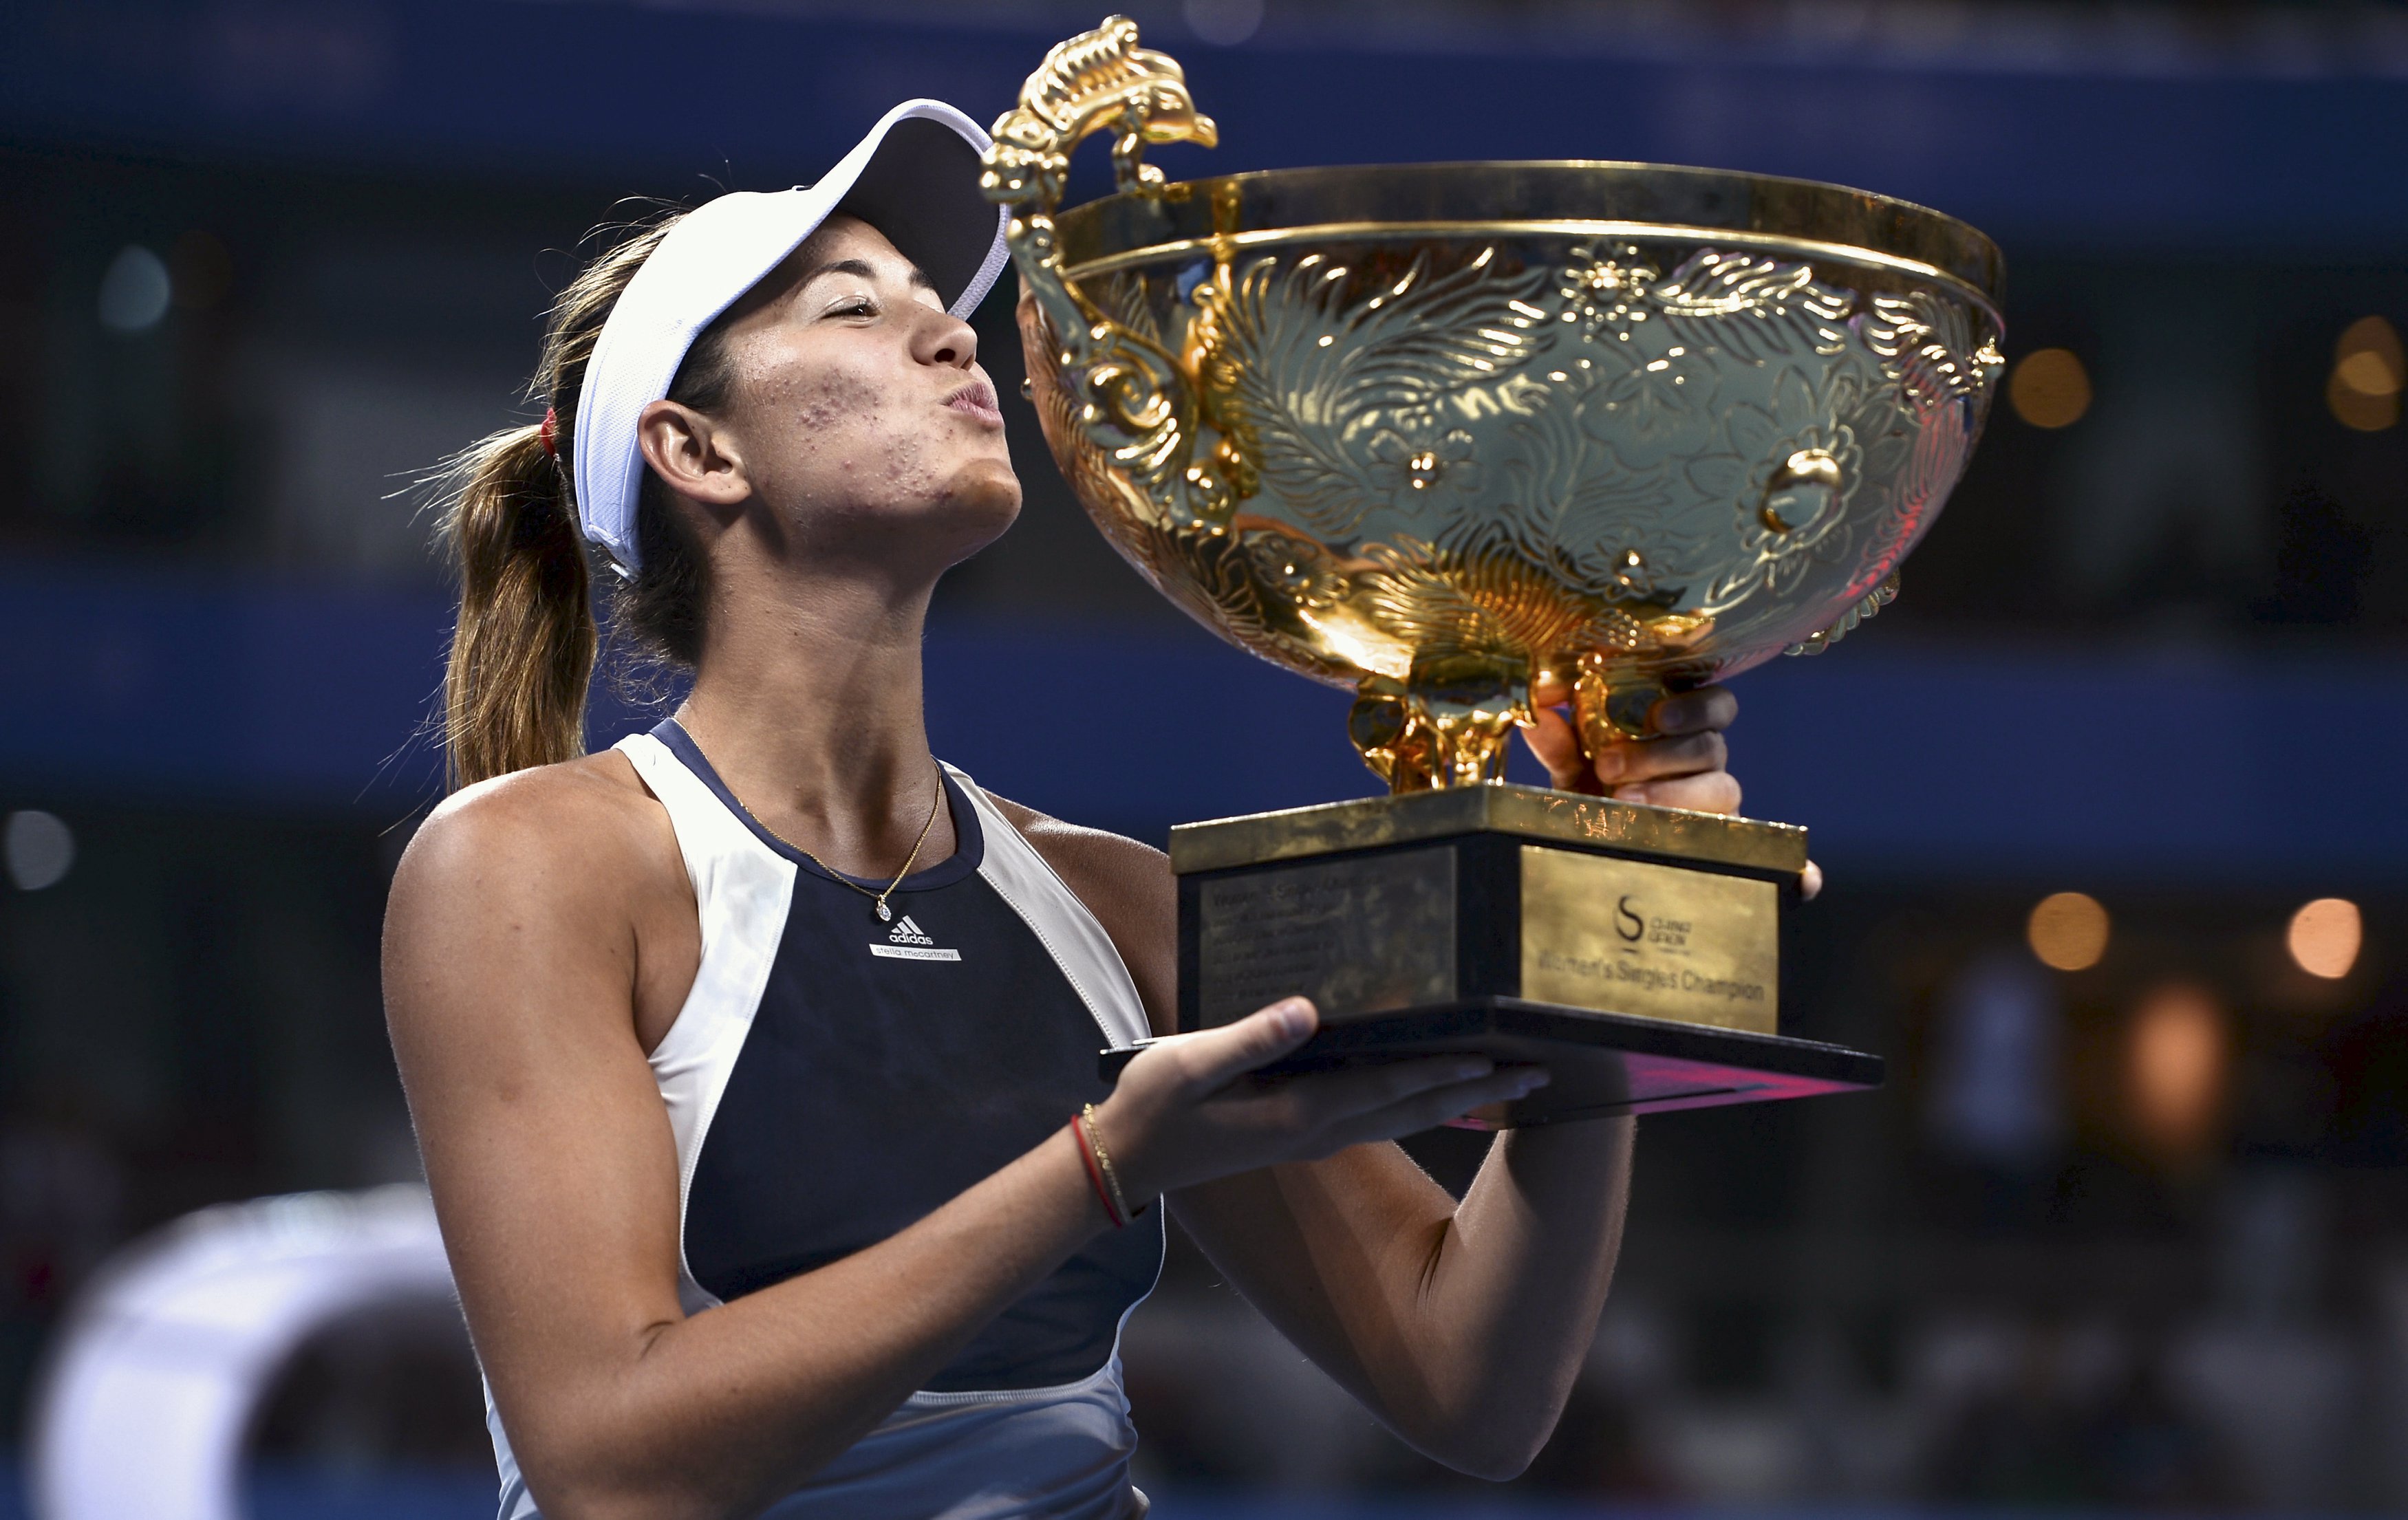 Spain's Garbine Muguruza kisses the winning trophy after her China Open title win in Beijing on Sunday. Hours later she pulled out of Hong Kong. Photo: Reuters